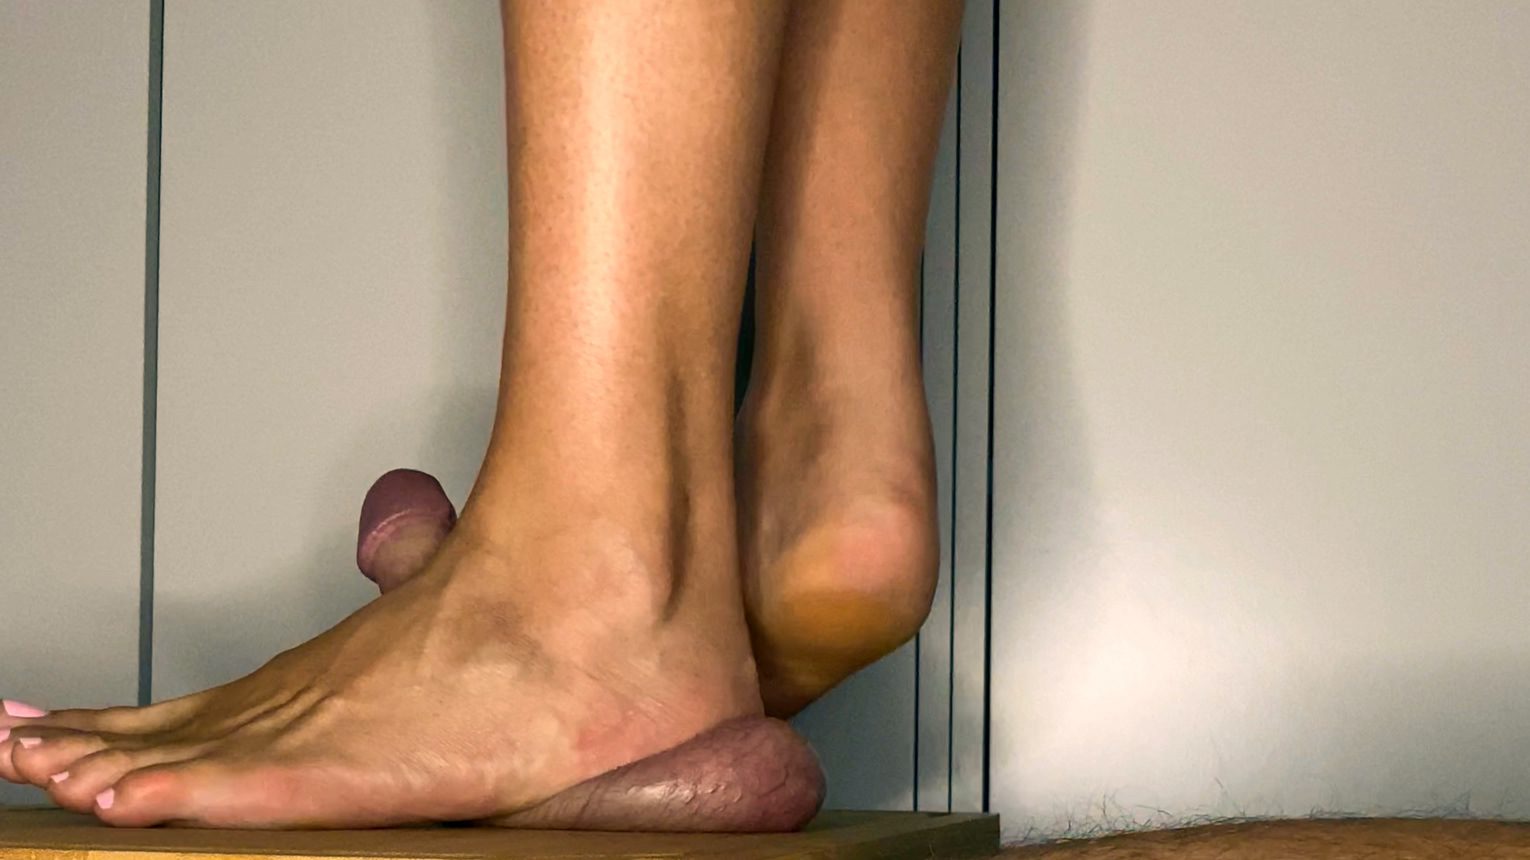 Stomp the Cum Out – No Hands with my Pink Toenails!